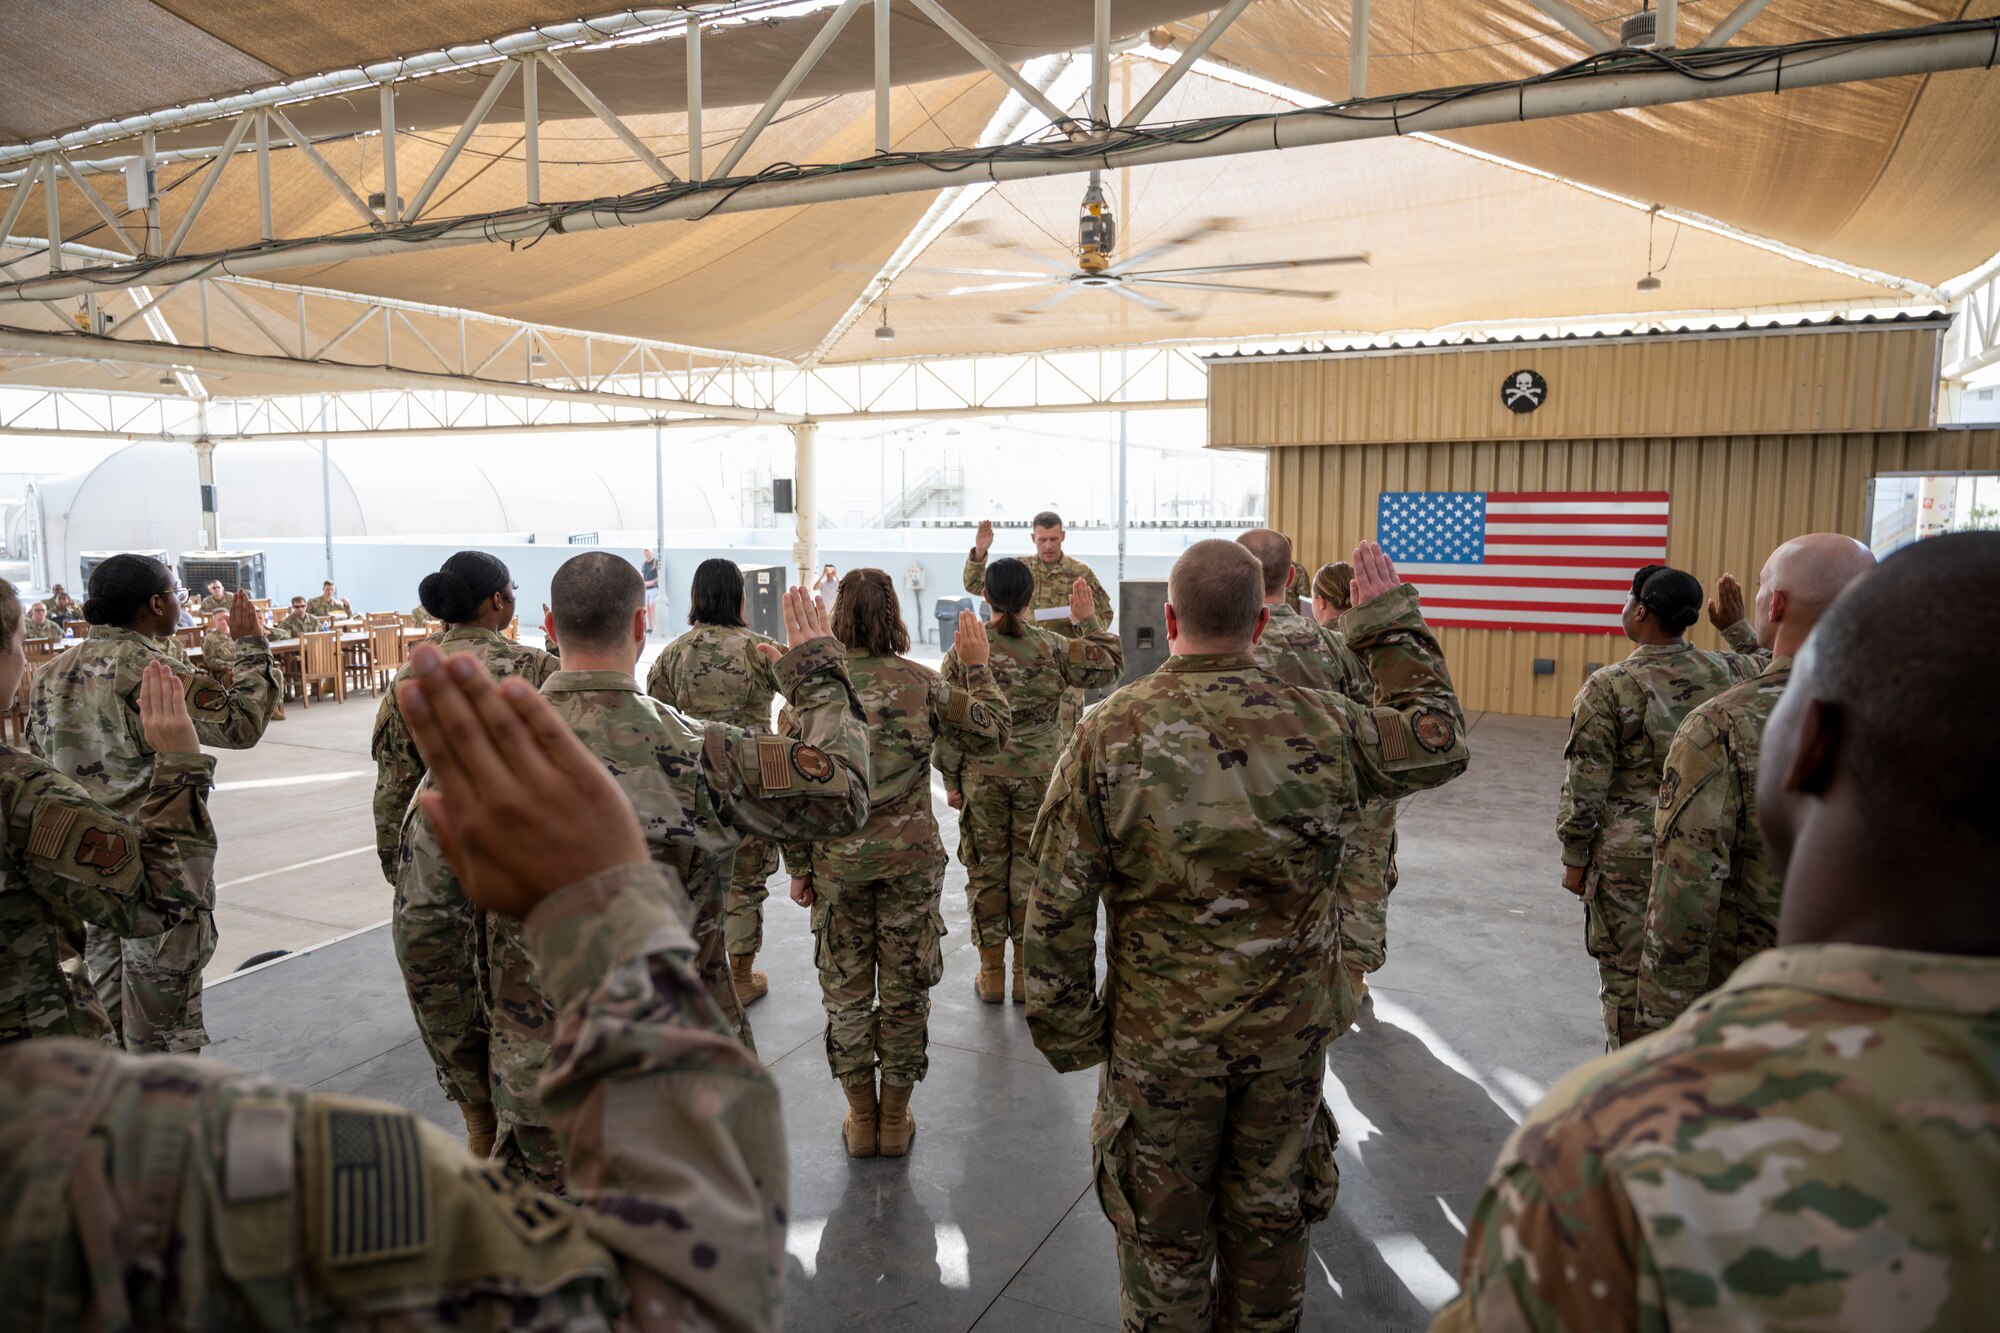 U.S. Air Force Brig. Gen. Andrew Clark, 380th Air Expeditionary Wing commander, administers an oath to the Teal Team 6 (TT6) volunteer members during the Sexual Assault Prevention and Response (SAPR), TT6 induction ceremony at Al Dhafra Air Base (ADAB) United Arab Emirates, June 18, 2021. TT6 members, take an oath to uphold a code of ethics, promote mutual respect, to support others and promise to improve the culture around them.